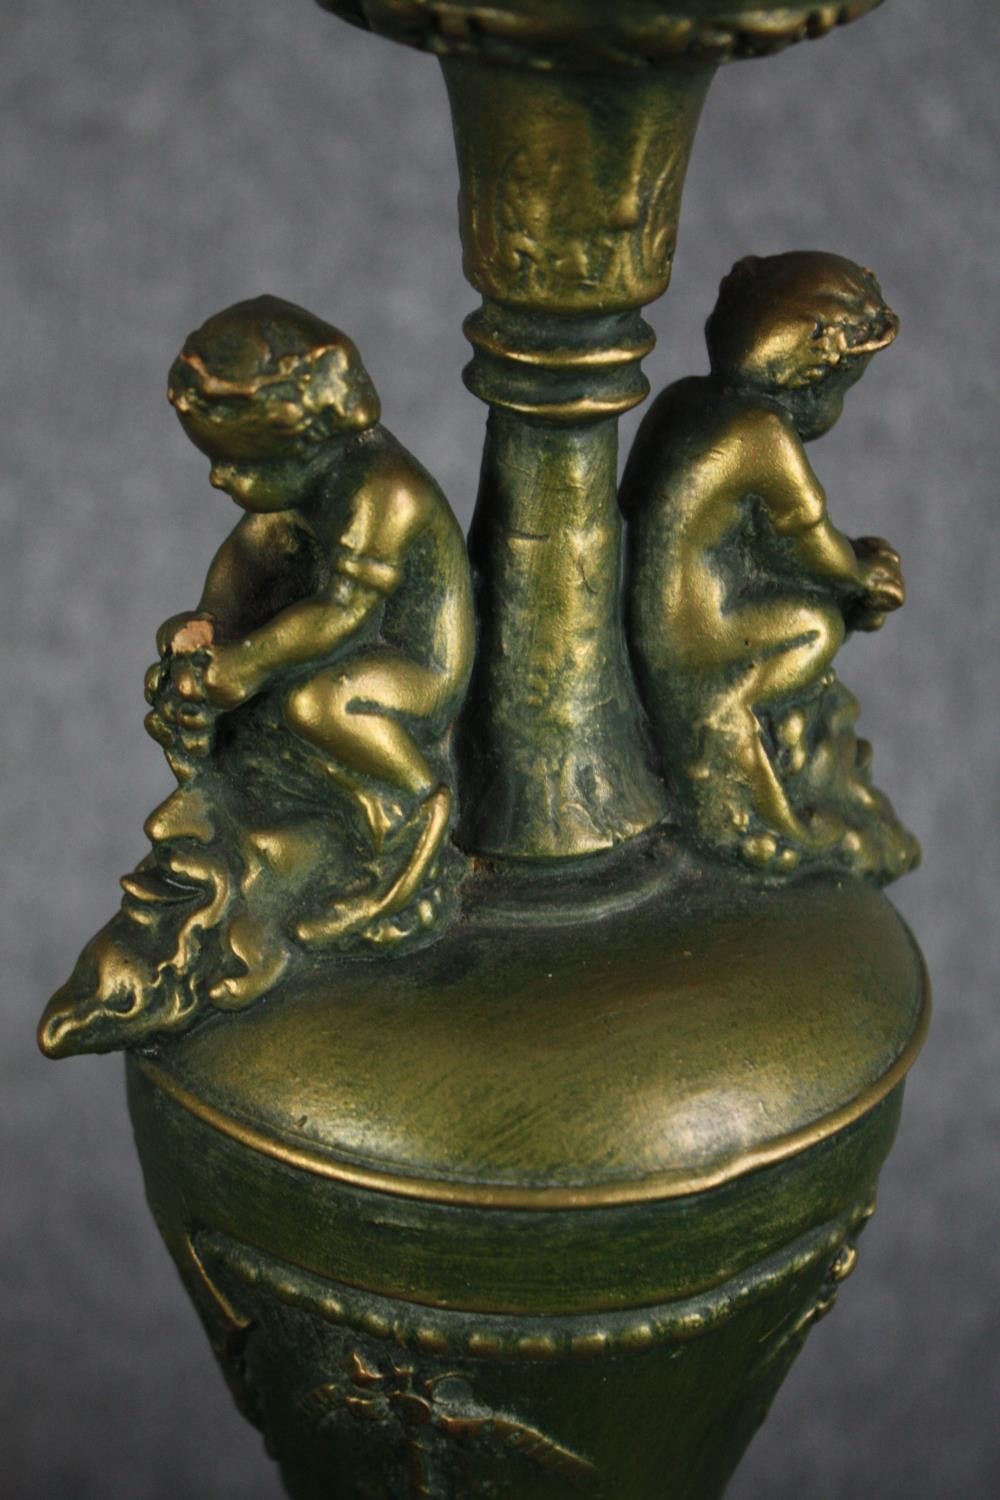 A pair of painted wooden urn design lamps. Decorated with cherubs and a worn greenish gold finish. - Image 3 of 4